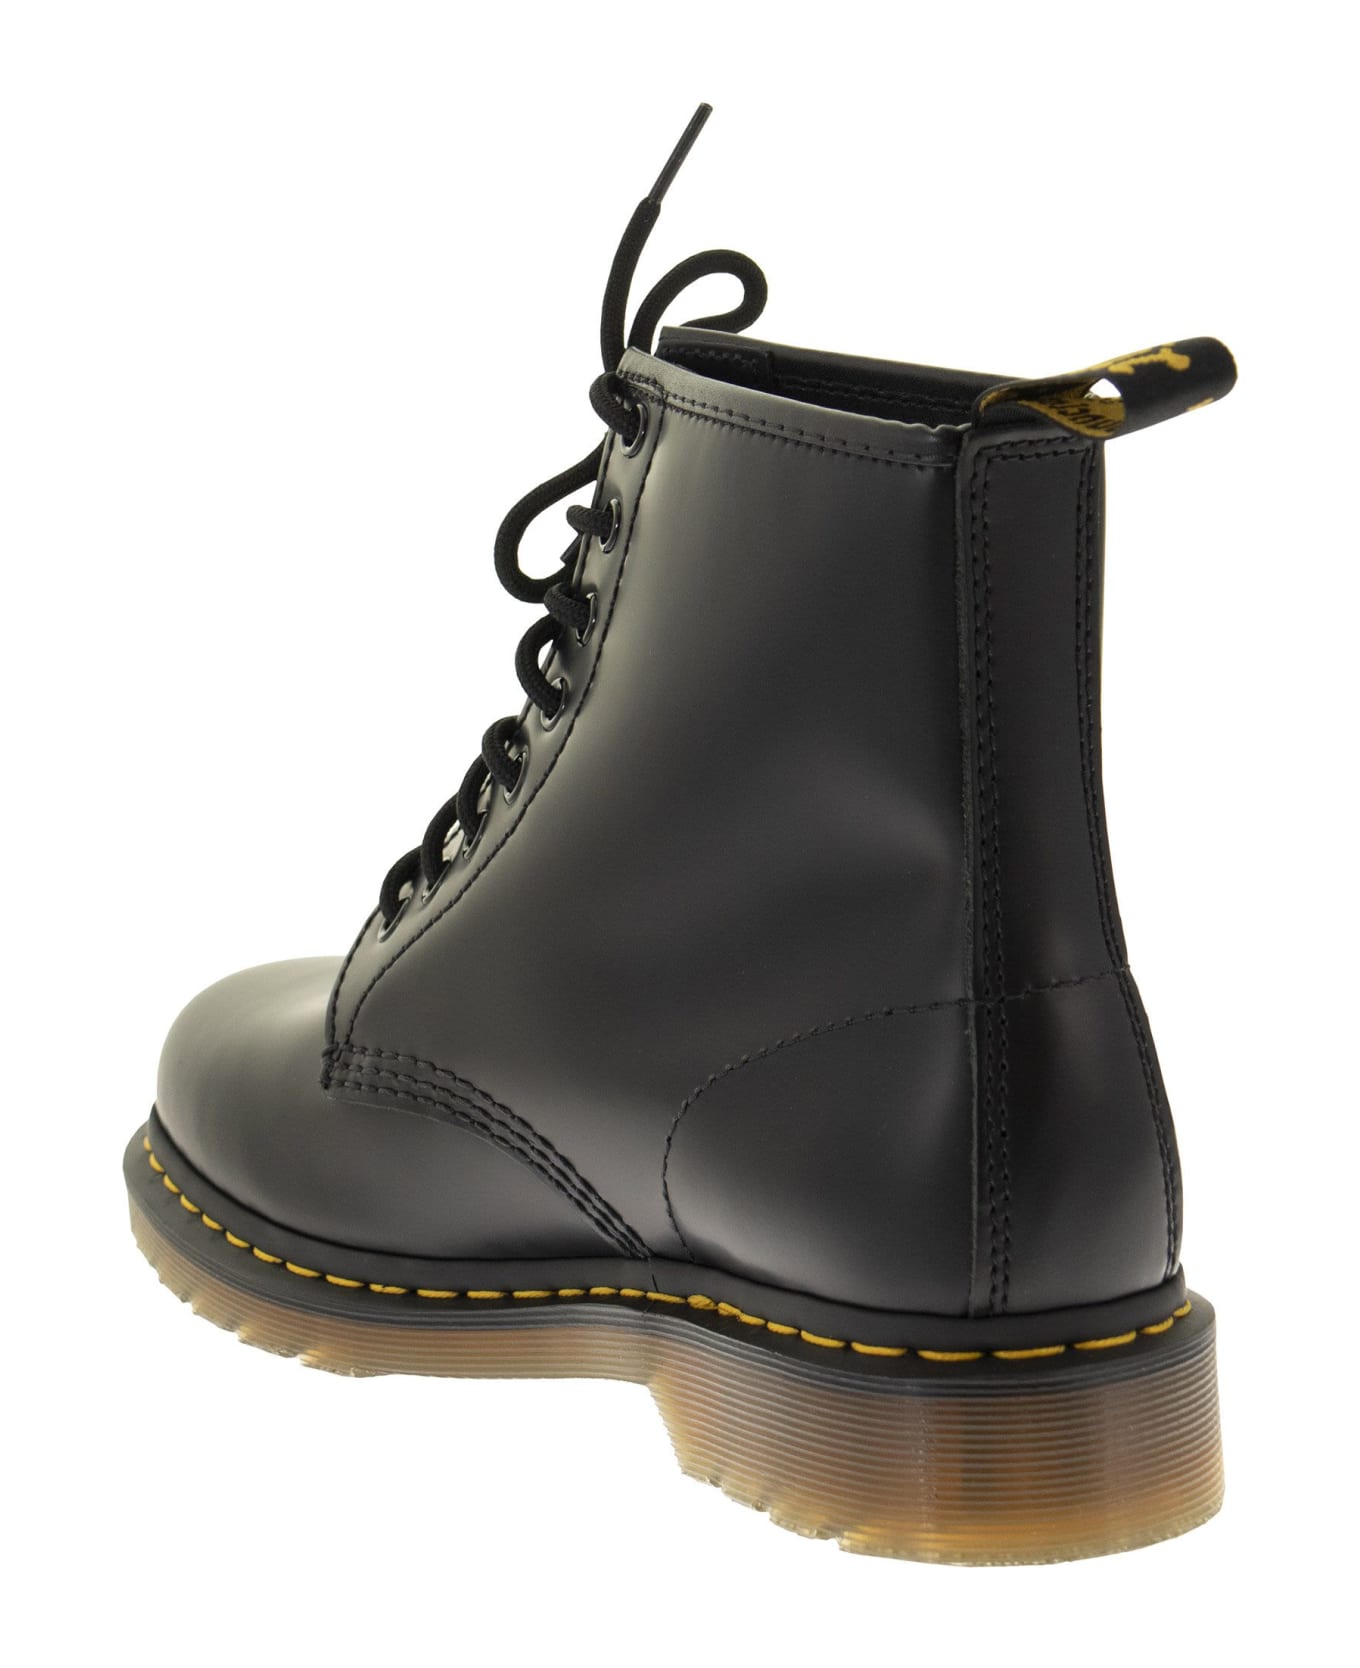 Dr. Martens 1460 Smooth Leather Combat Boots - Black ブーツ